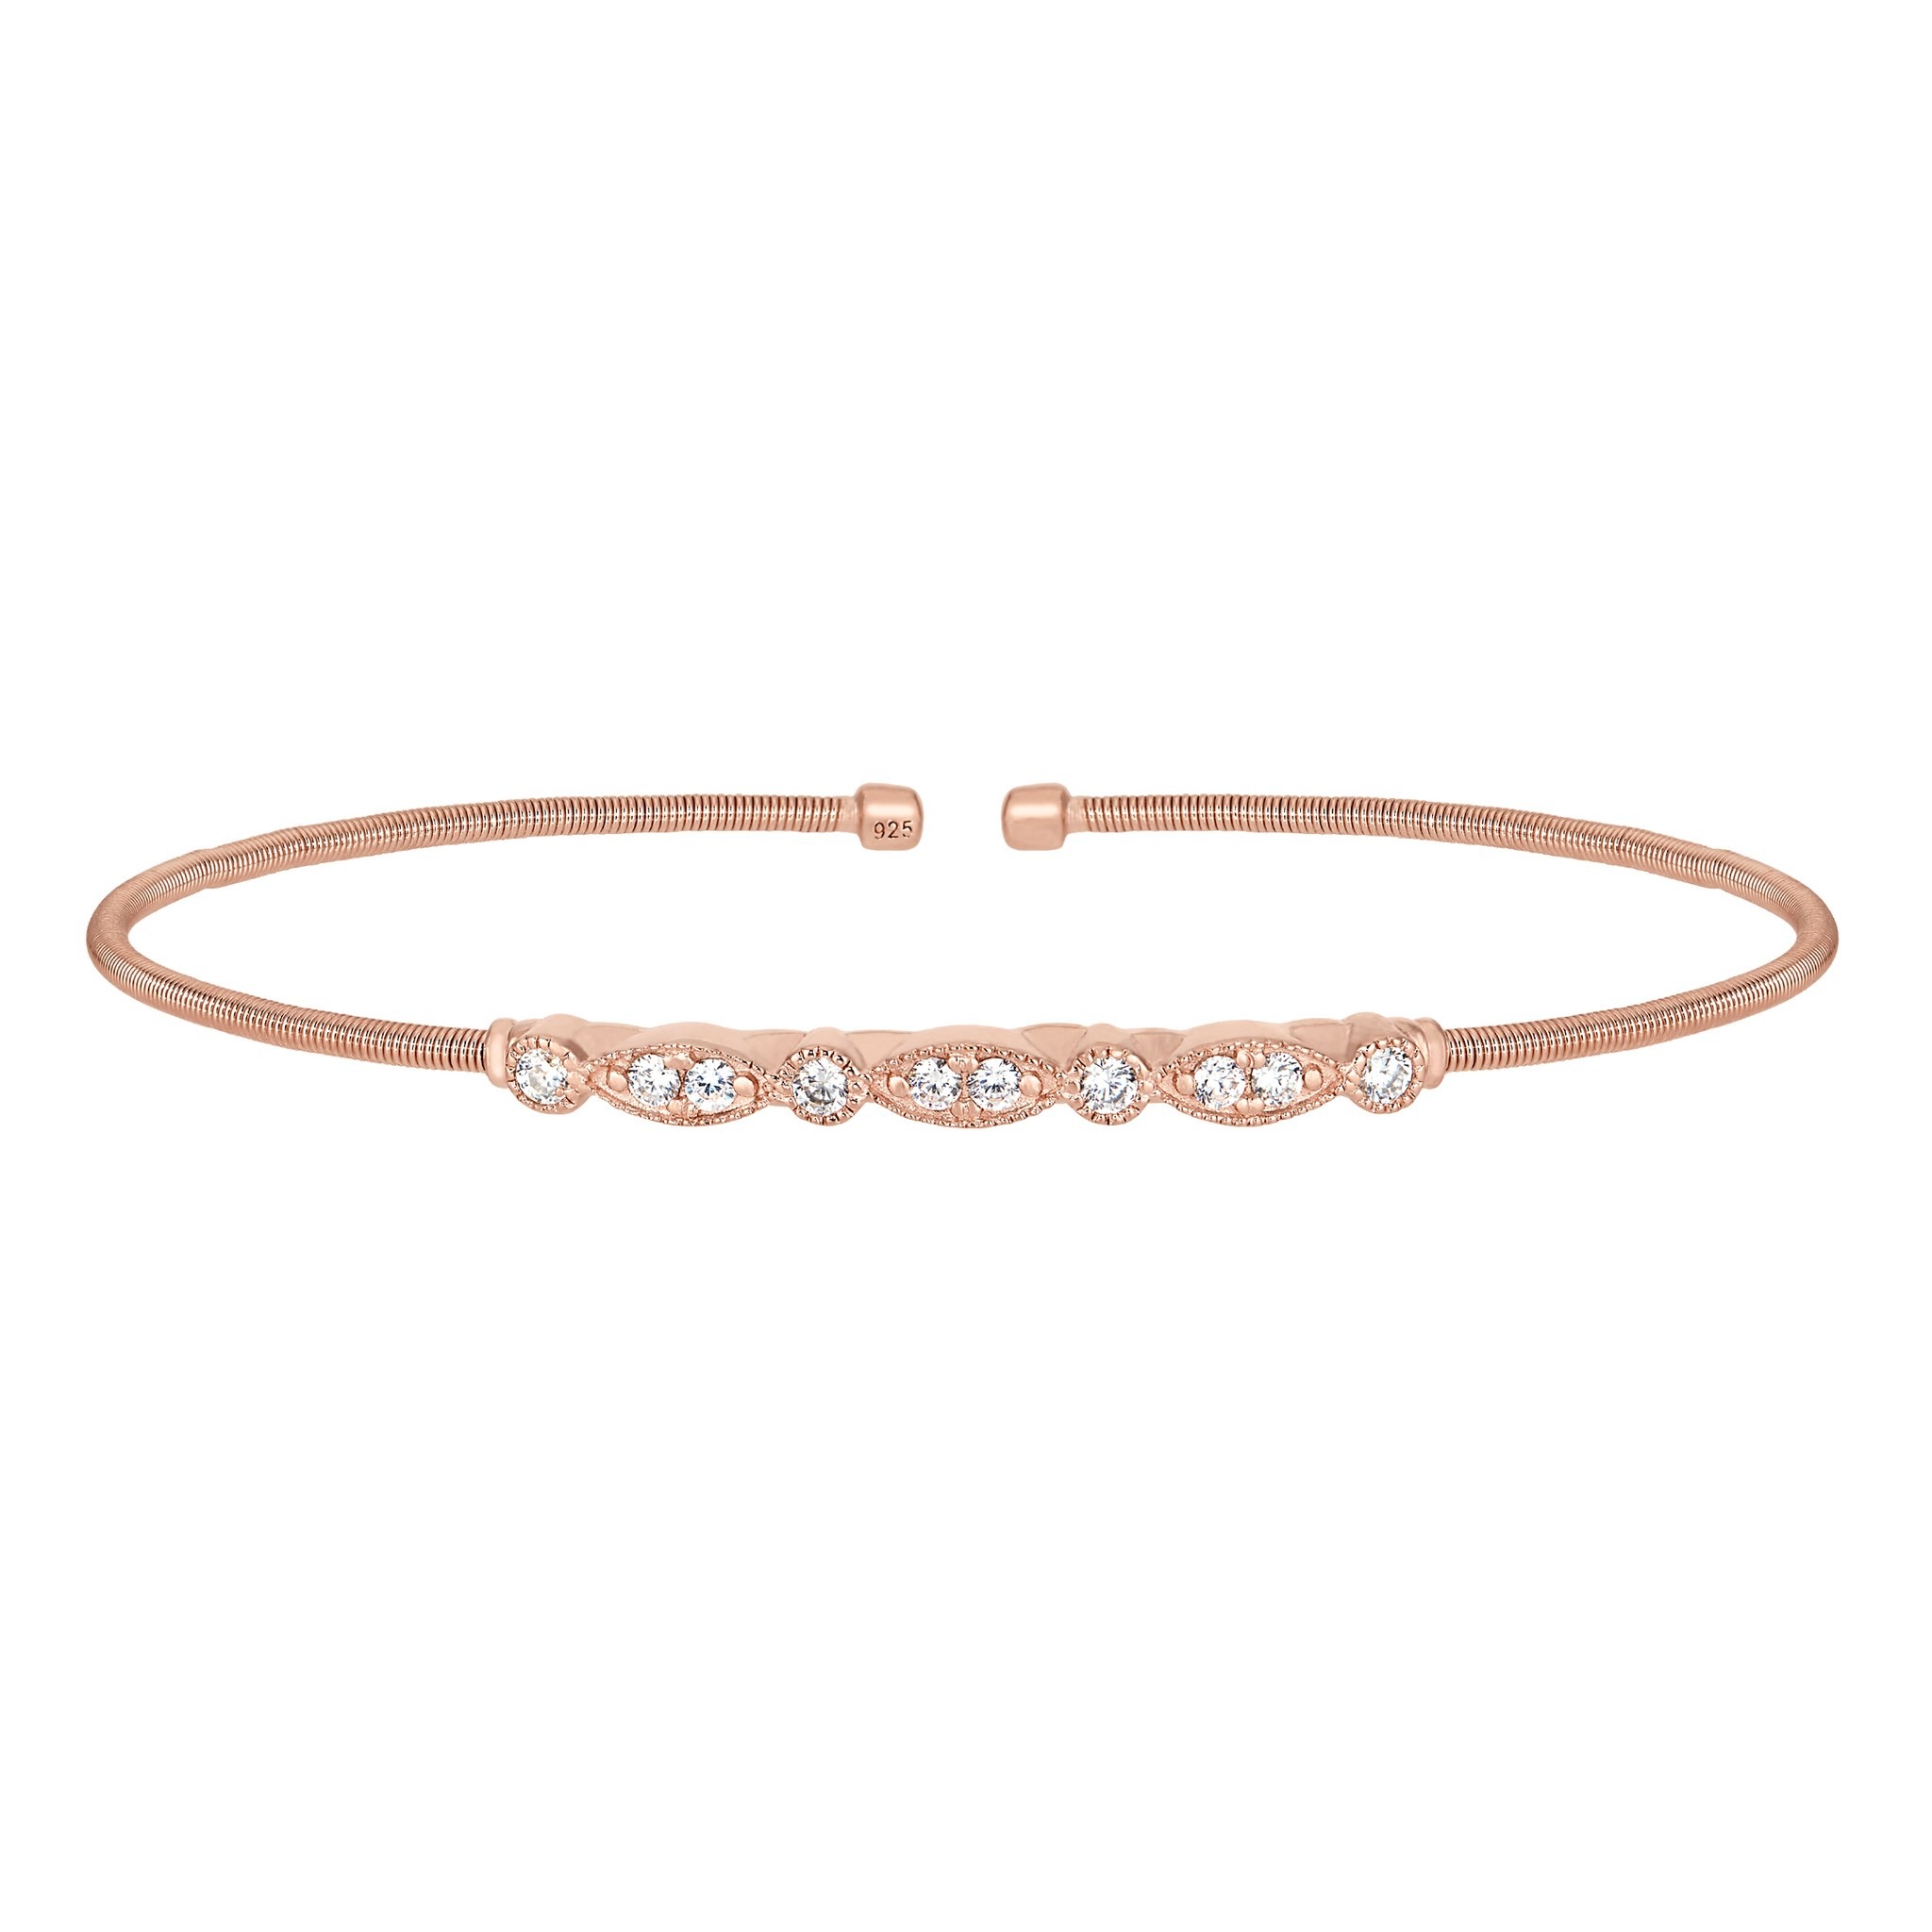 Rose Gold Finish Sterling Silver Cable Cuff Bracelet w/Simulated Diamond Marquis/Round Design